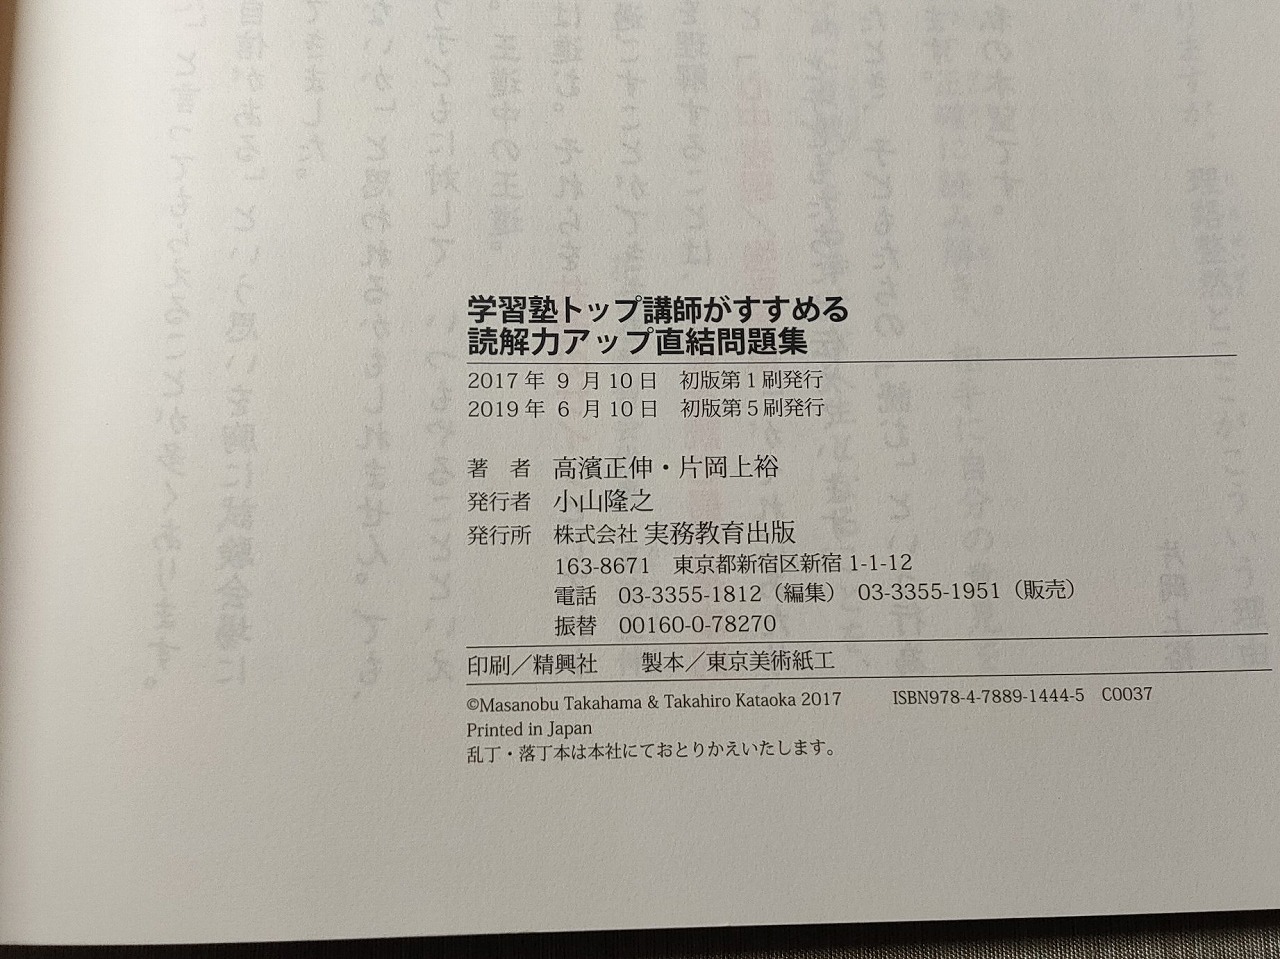  elementary school. Japanese philology .. top ......... power up direct connection workbook height . regular . used postage 185 jpy O1